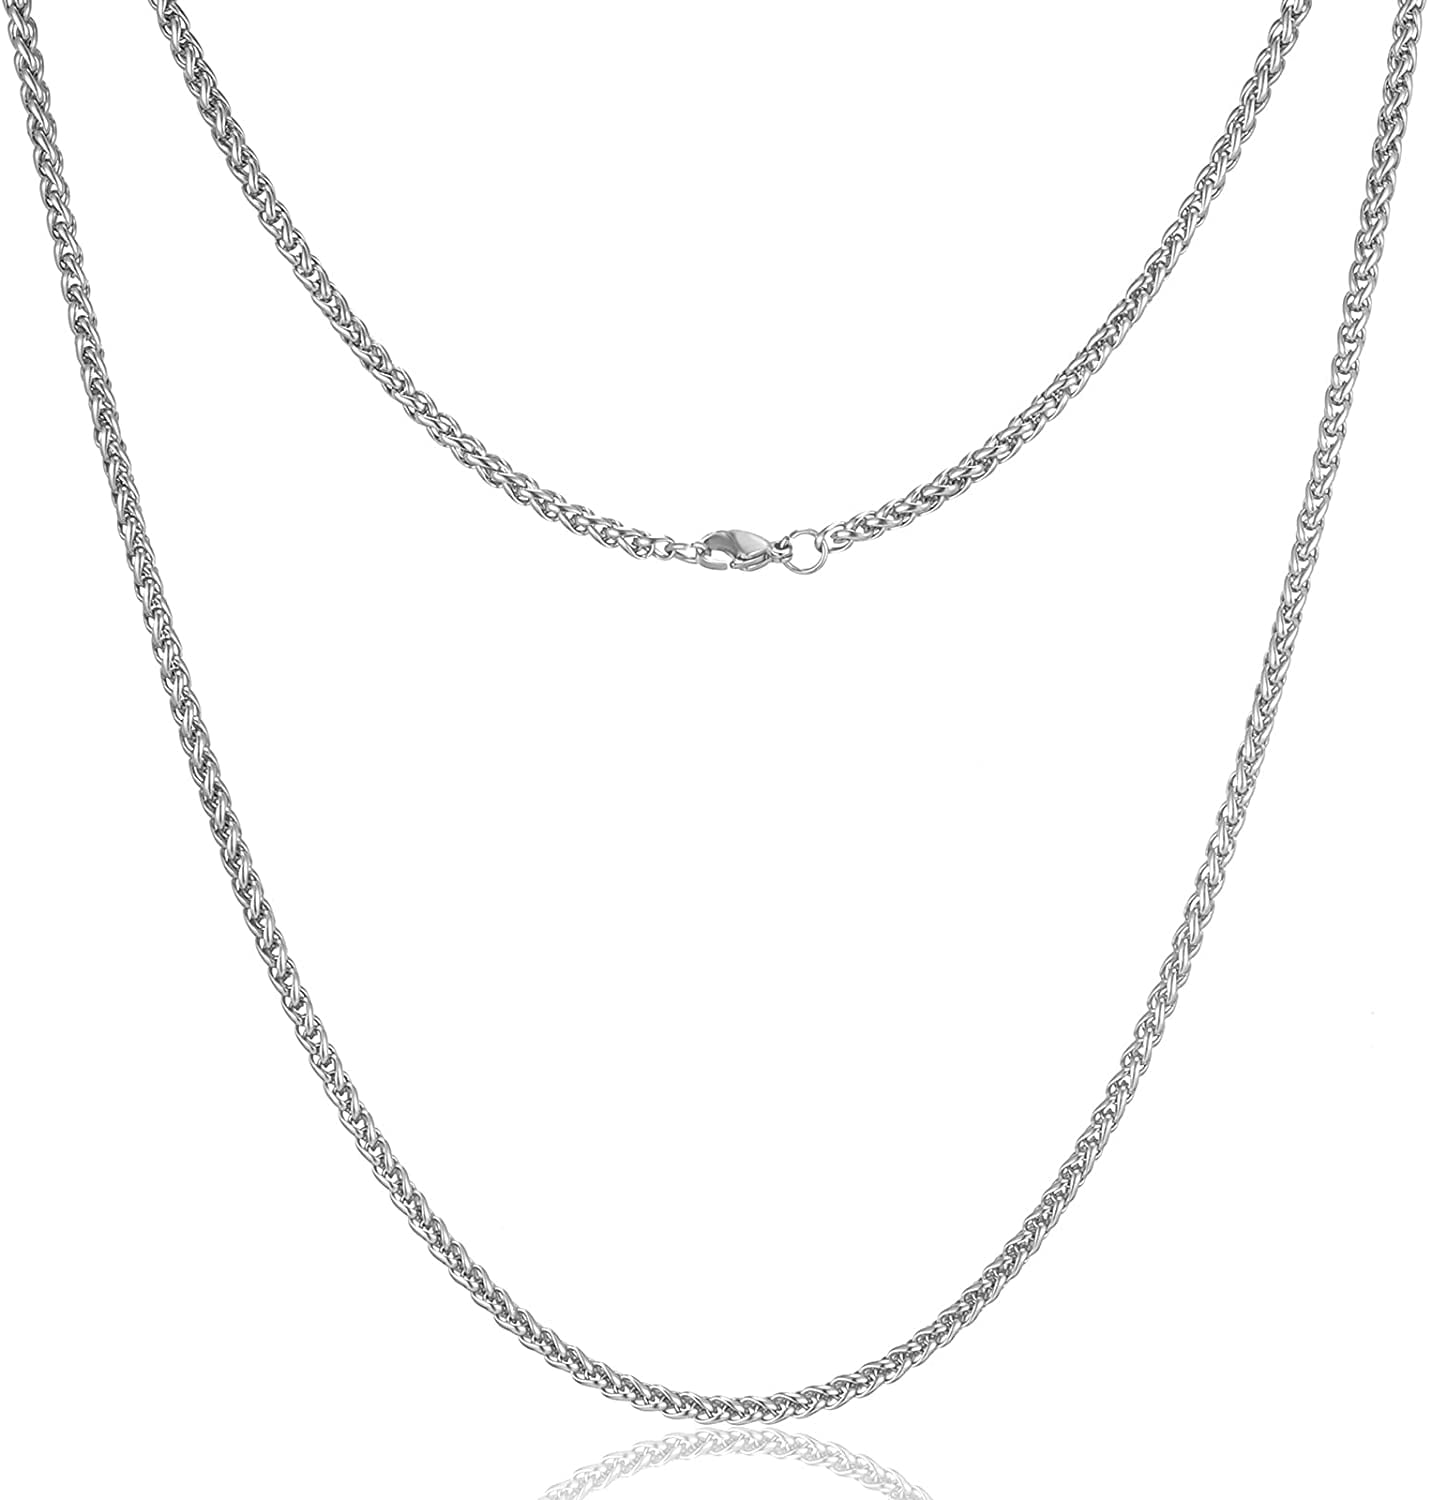 22" Silver Stainless Steel 3.5 mm Chain Necklace for Men's Wheat Braided  #20 